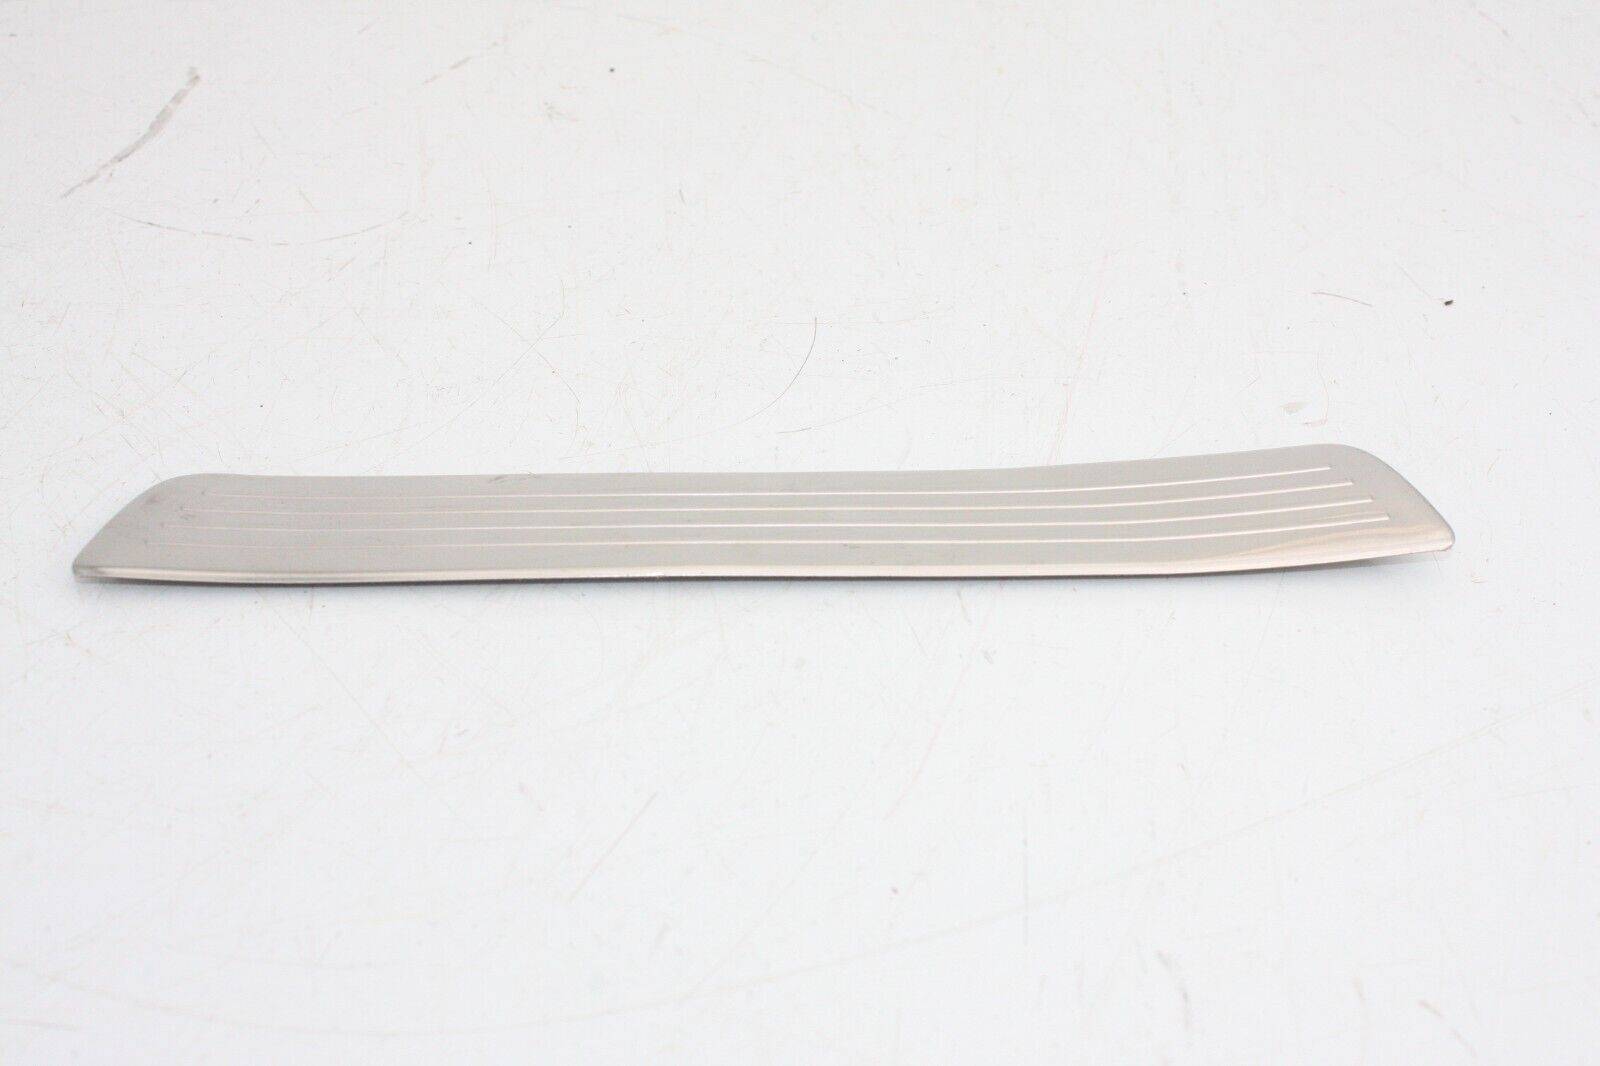 MERCEDES-S-CLASS-W222-FRONT-RIGHT-SIDE-DOOR-SILL-TRIM-COVER-2013-TO-2017-175421099973-2